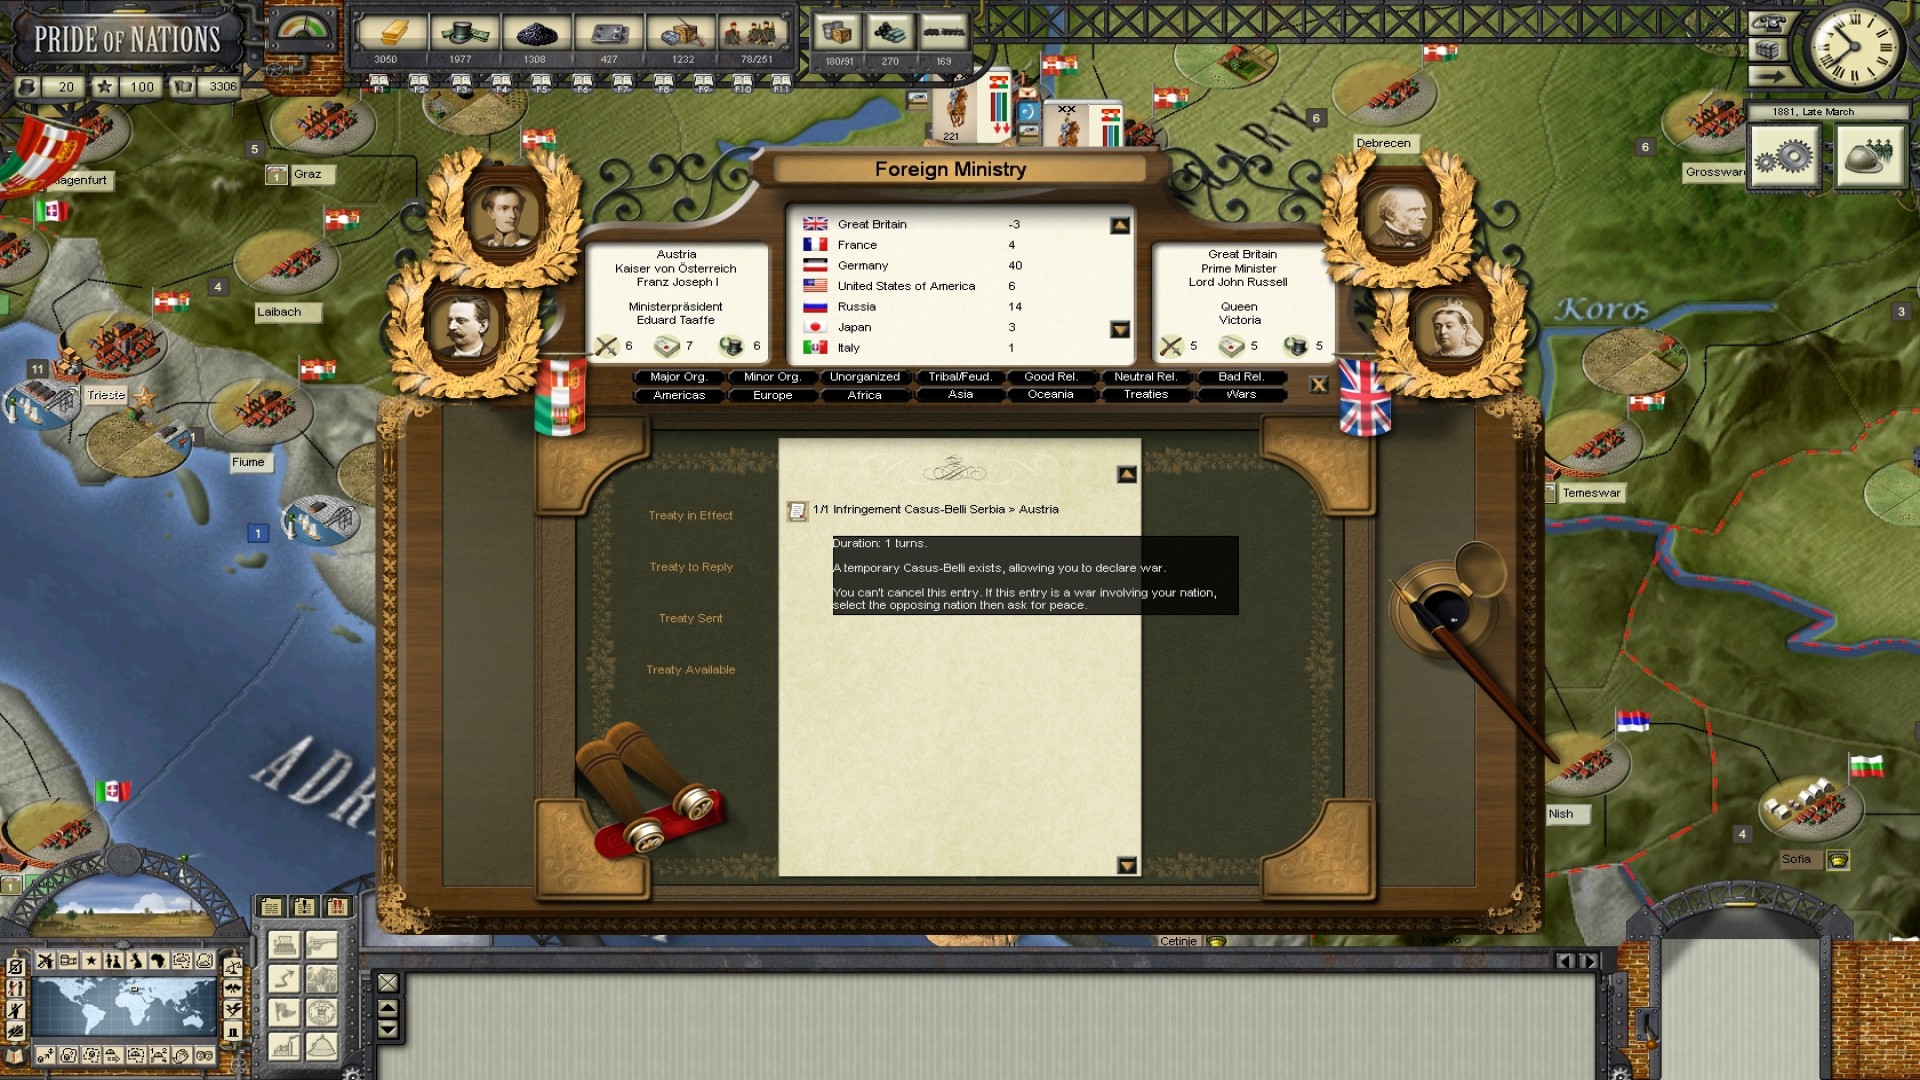 Pride of Nations: The Scramble for Africa screenshot